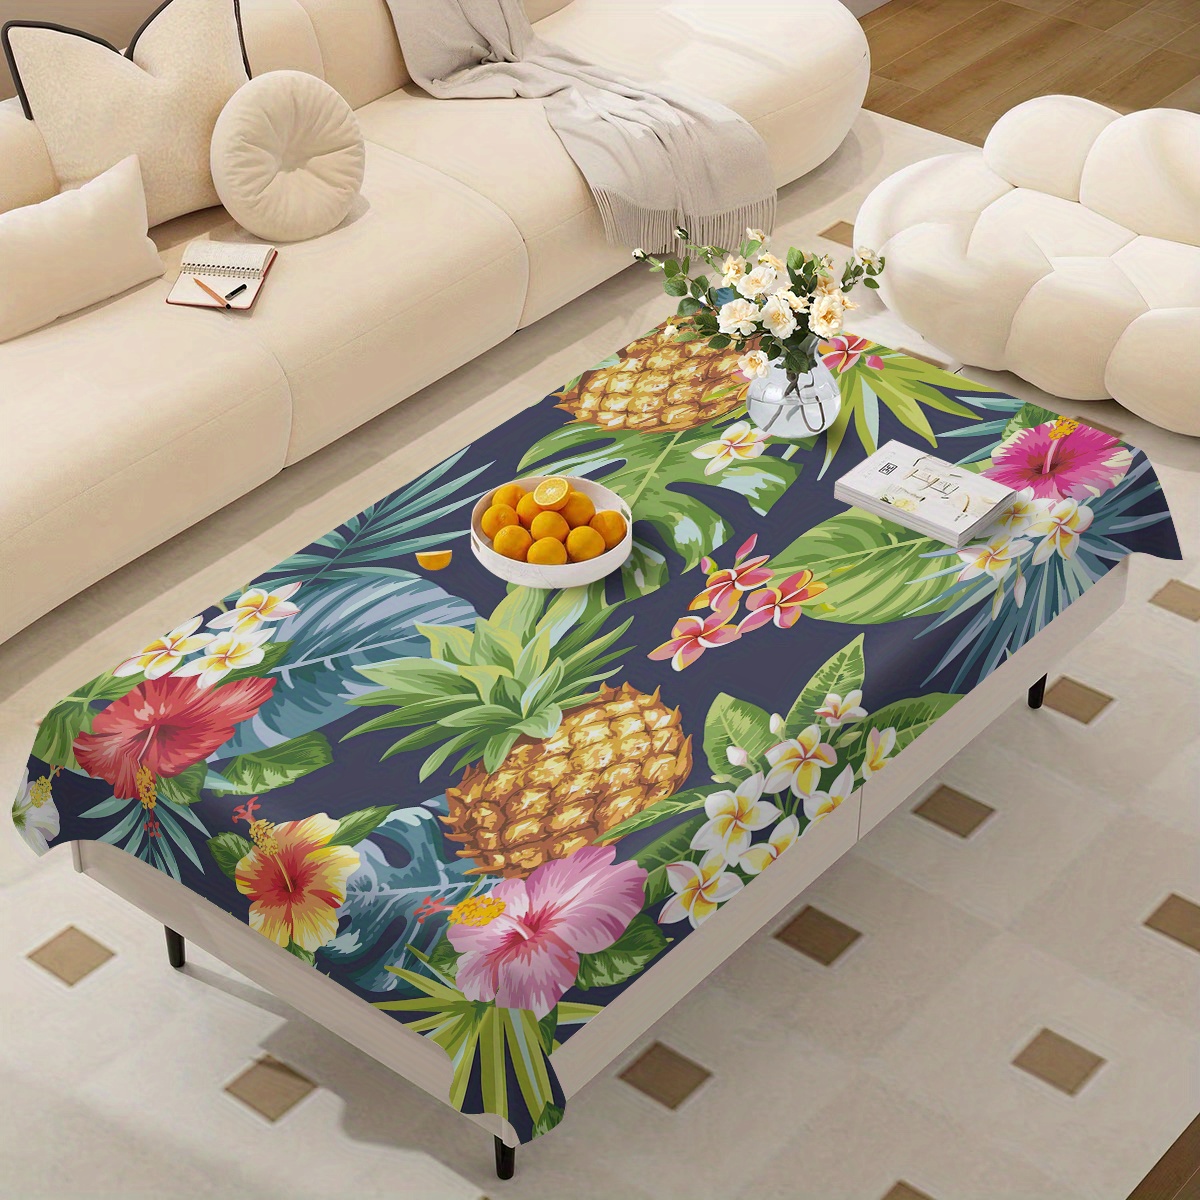 

Tropical Pineapple Print Tablecloth - Mixed Color Polyester Machine Made Table Cover For Indoor/outdoor Party Decorations - Dustproof Kitchen Table Pad For Summer Parties